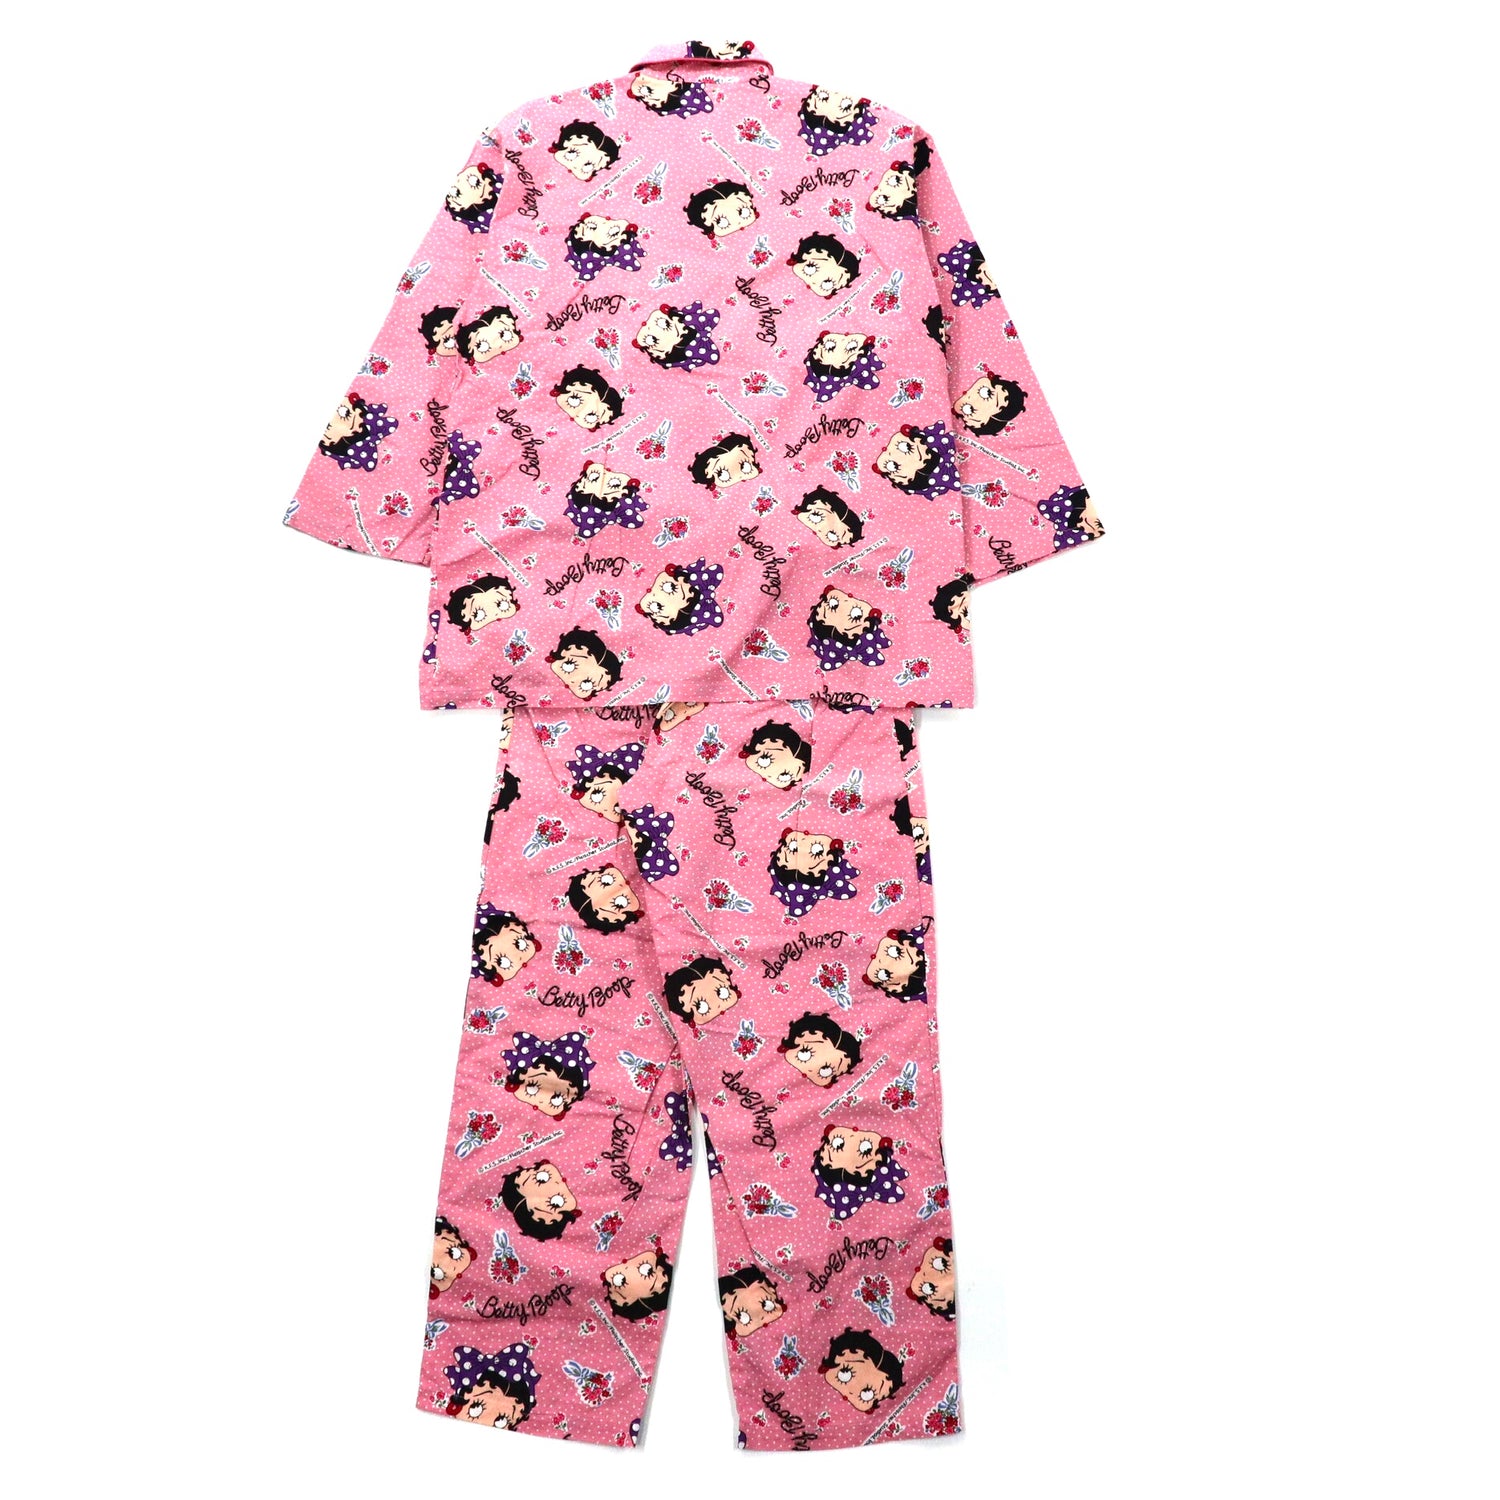 BETTY BOOP Pajamas Easy Setup L Pink Cotton Patterned Betty Boop